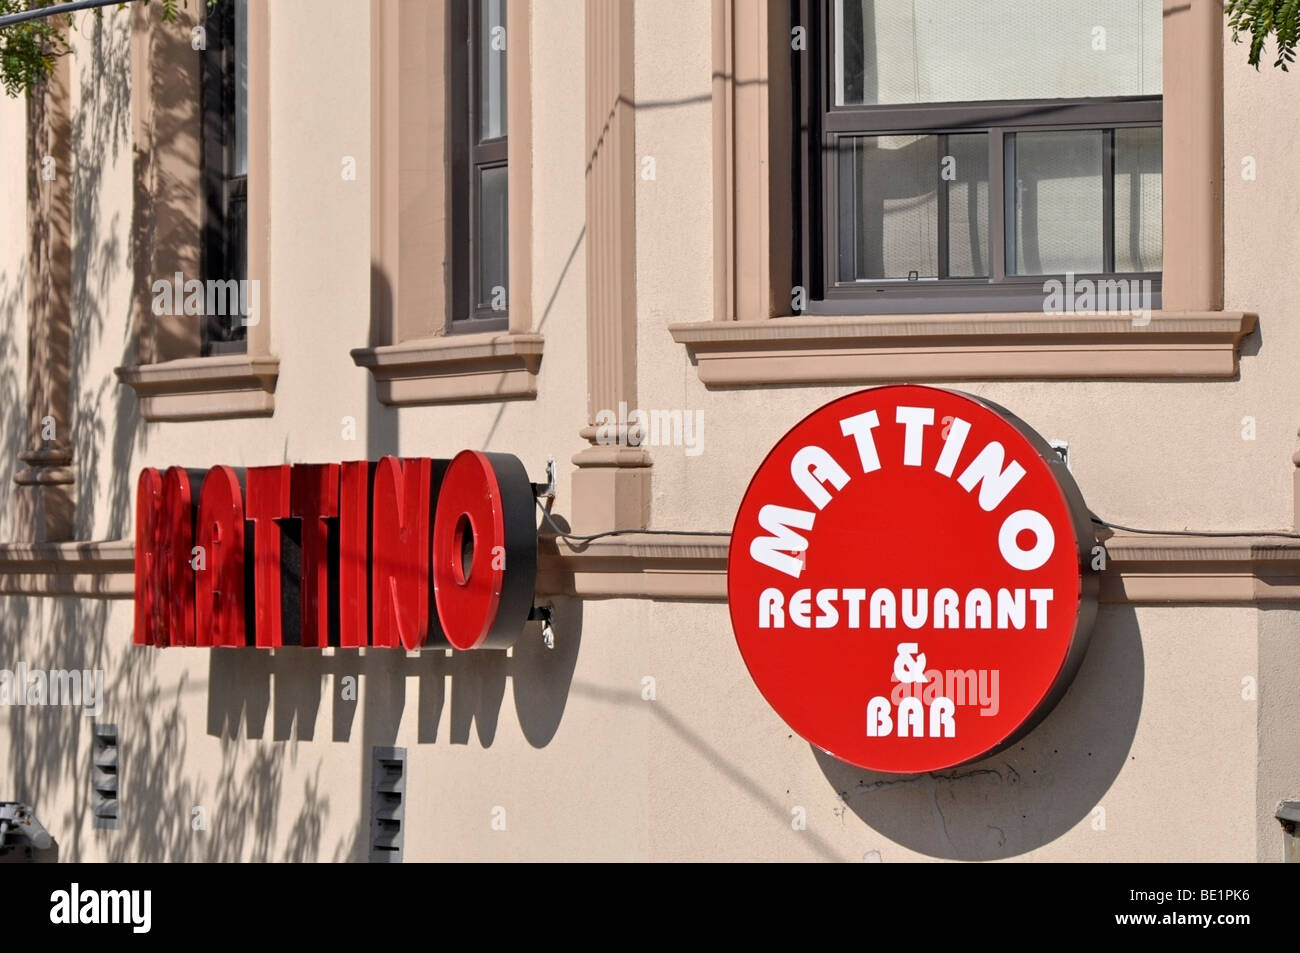 Signage of a Restaurant & Bar on College Street in Little Italy/Portugal Village, Ontario Canada Stock Photo